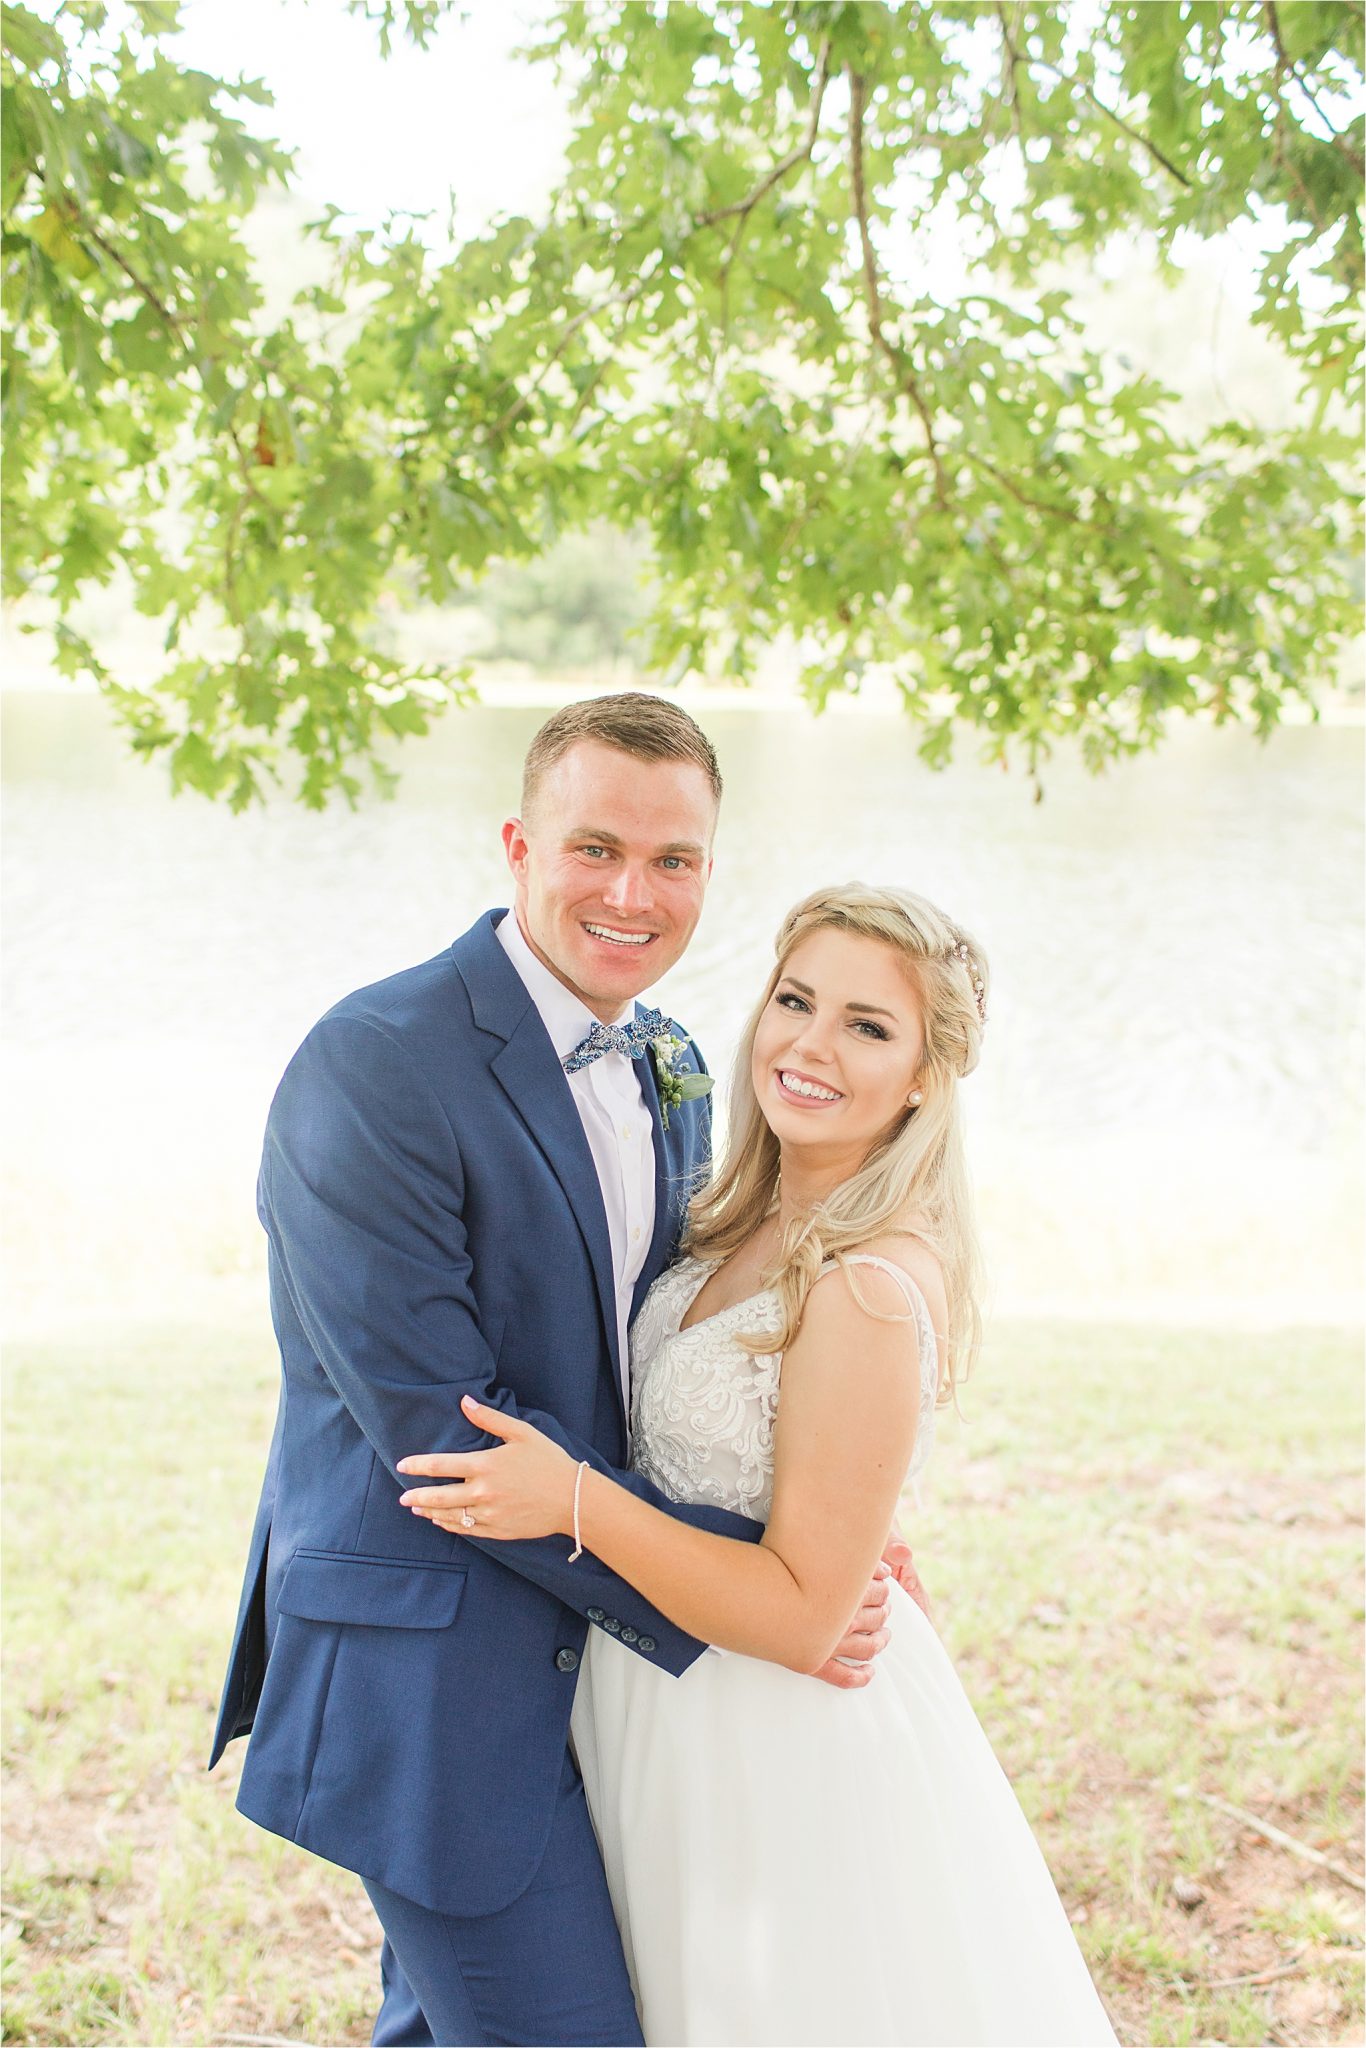 bridal-groom-portraits-photos-blue-suit-bow-tie-first-look